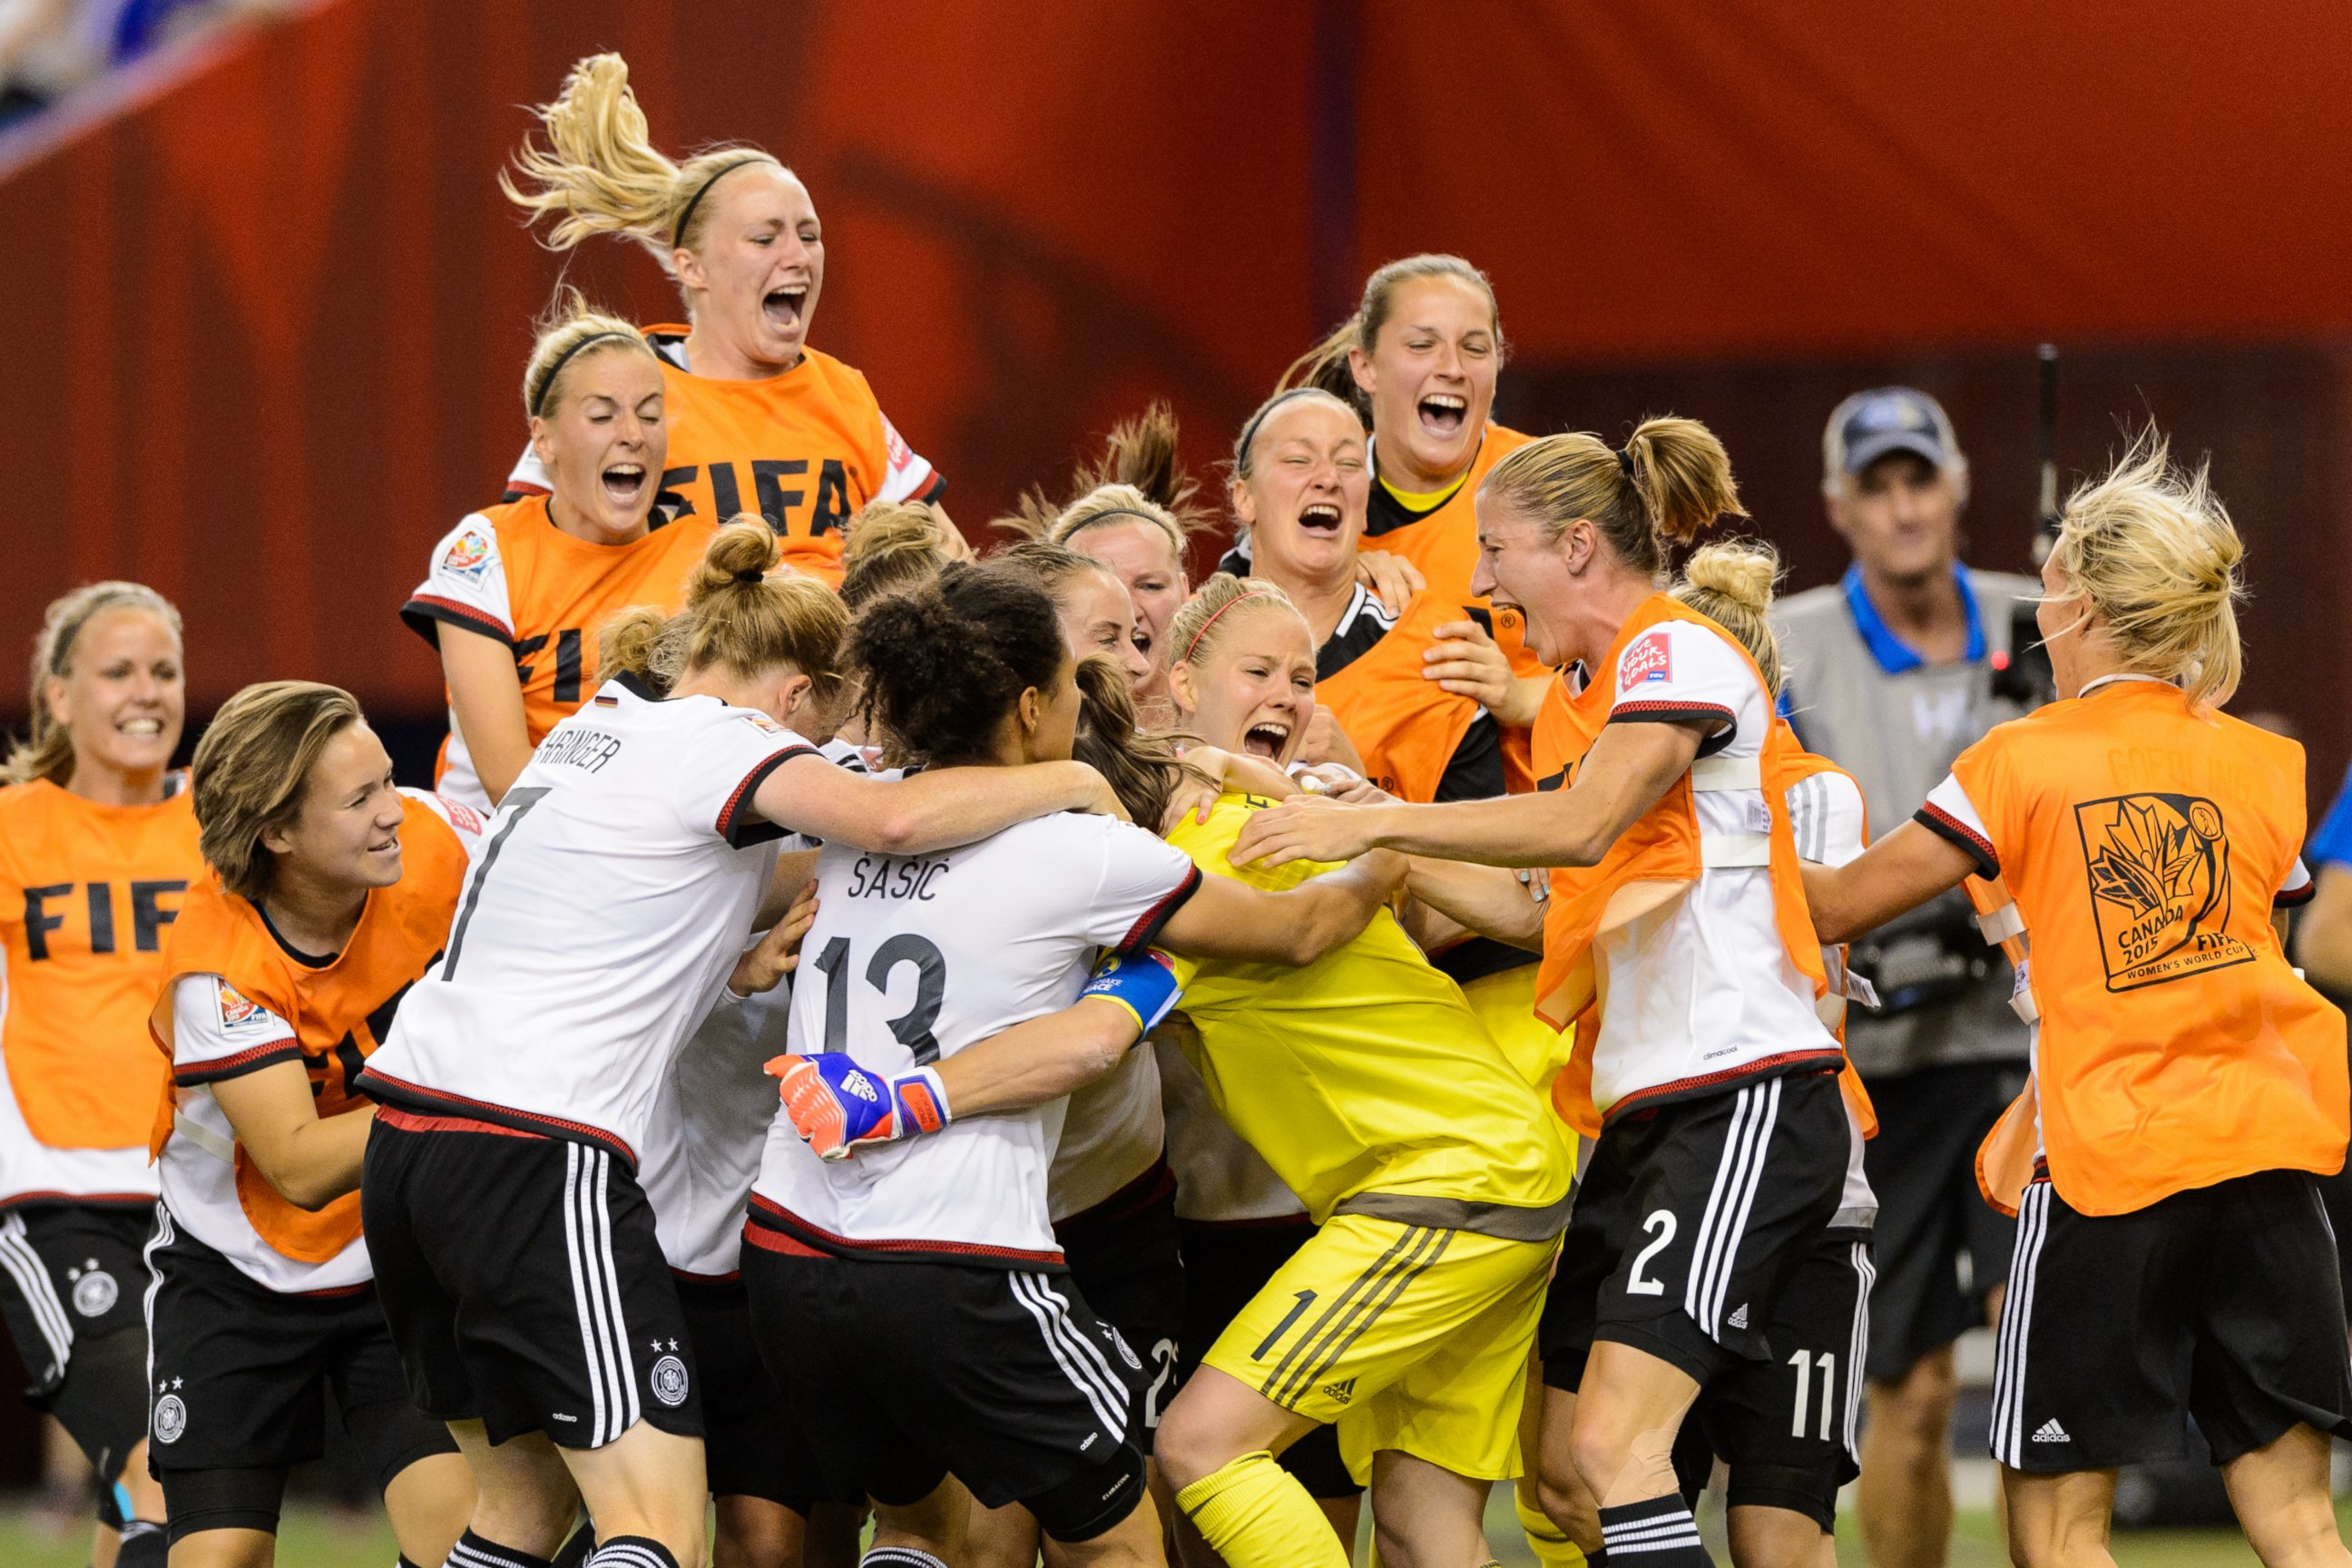 PHOTO: Germany celebrates their victory during the 2015 FIFA Women's World Cup quarter final match against France at Olympic Stadium on June 26, 2015 in Montreal, Quebec, Canada.